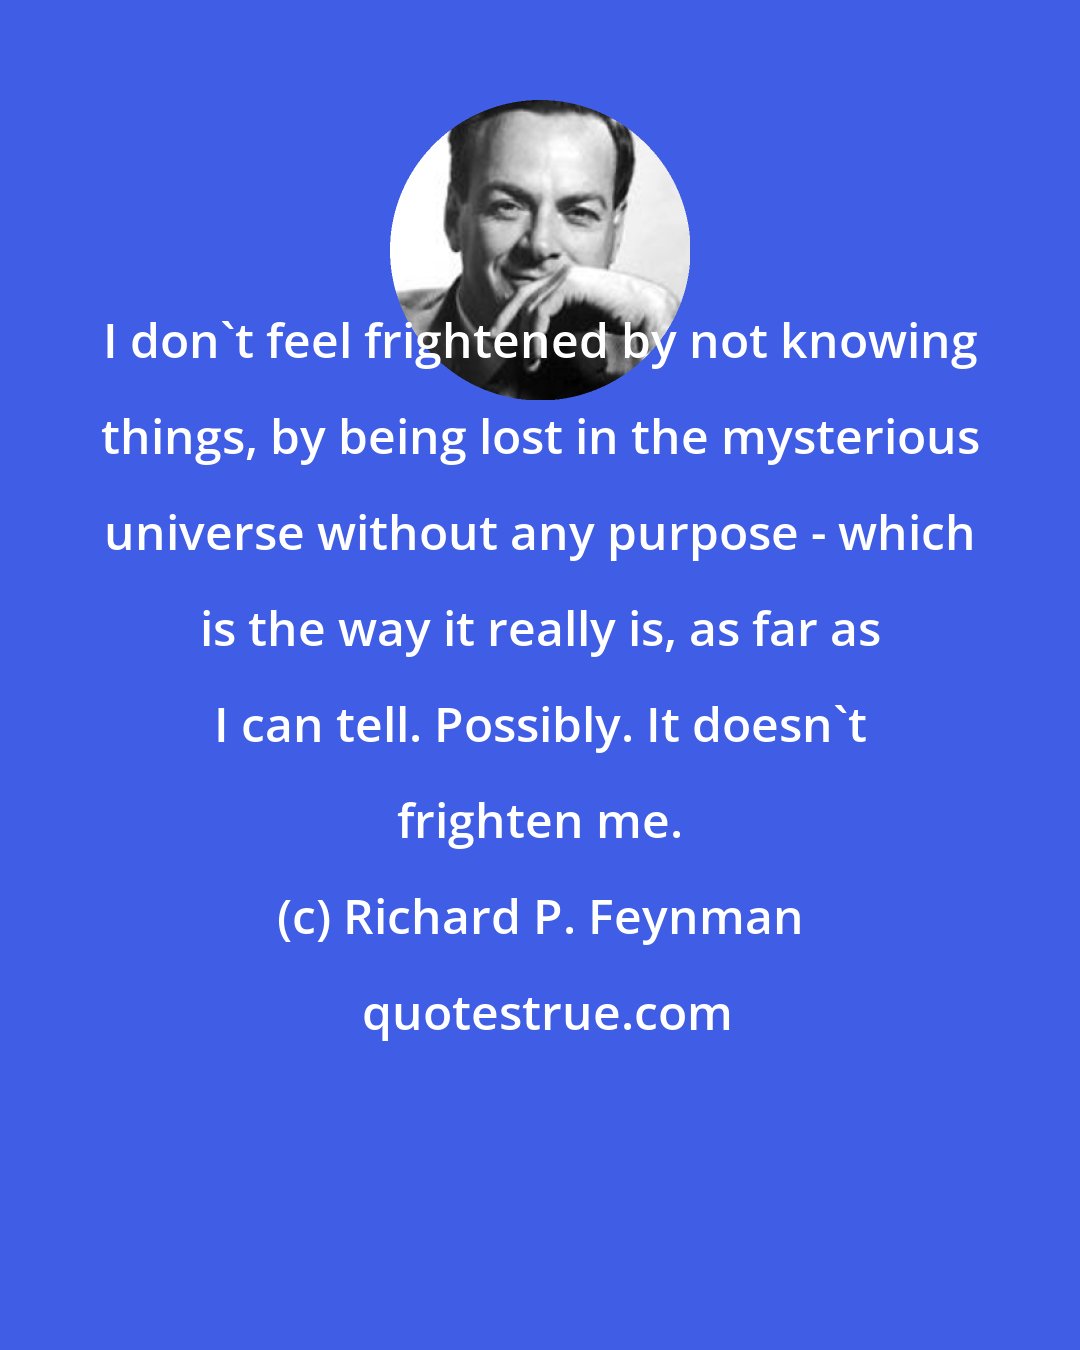 Richard P. Feynman: I don't feel frightened by not knowing things, by being lost in the mysterious universe without any purpose - which is the way it really is, as far as I can tell. Possibly. It doesn't frighten me.